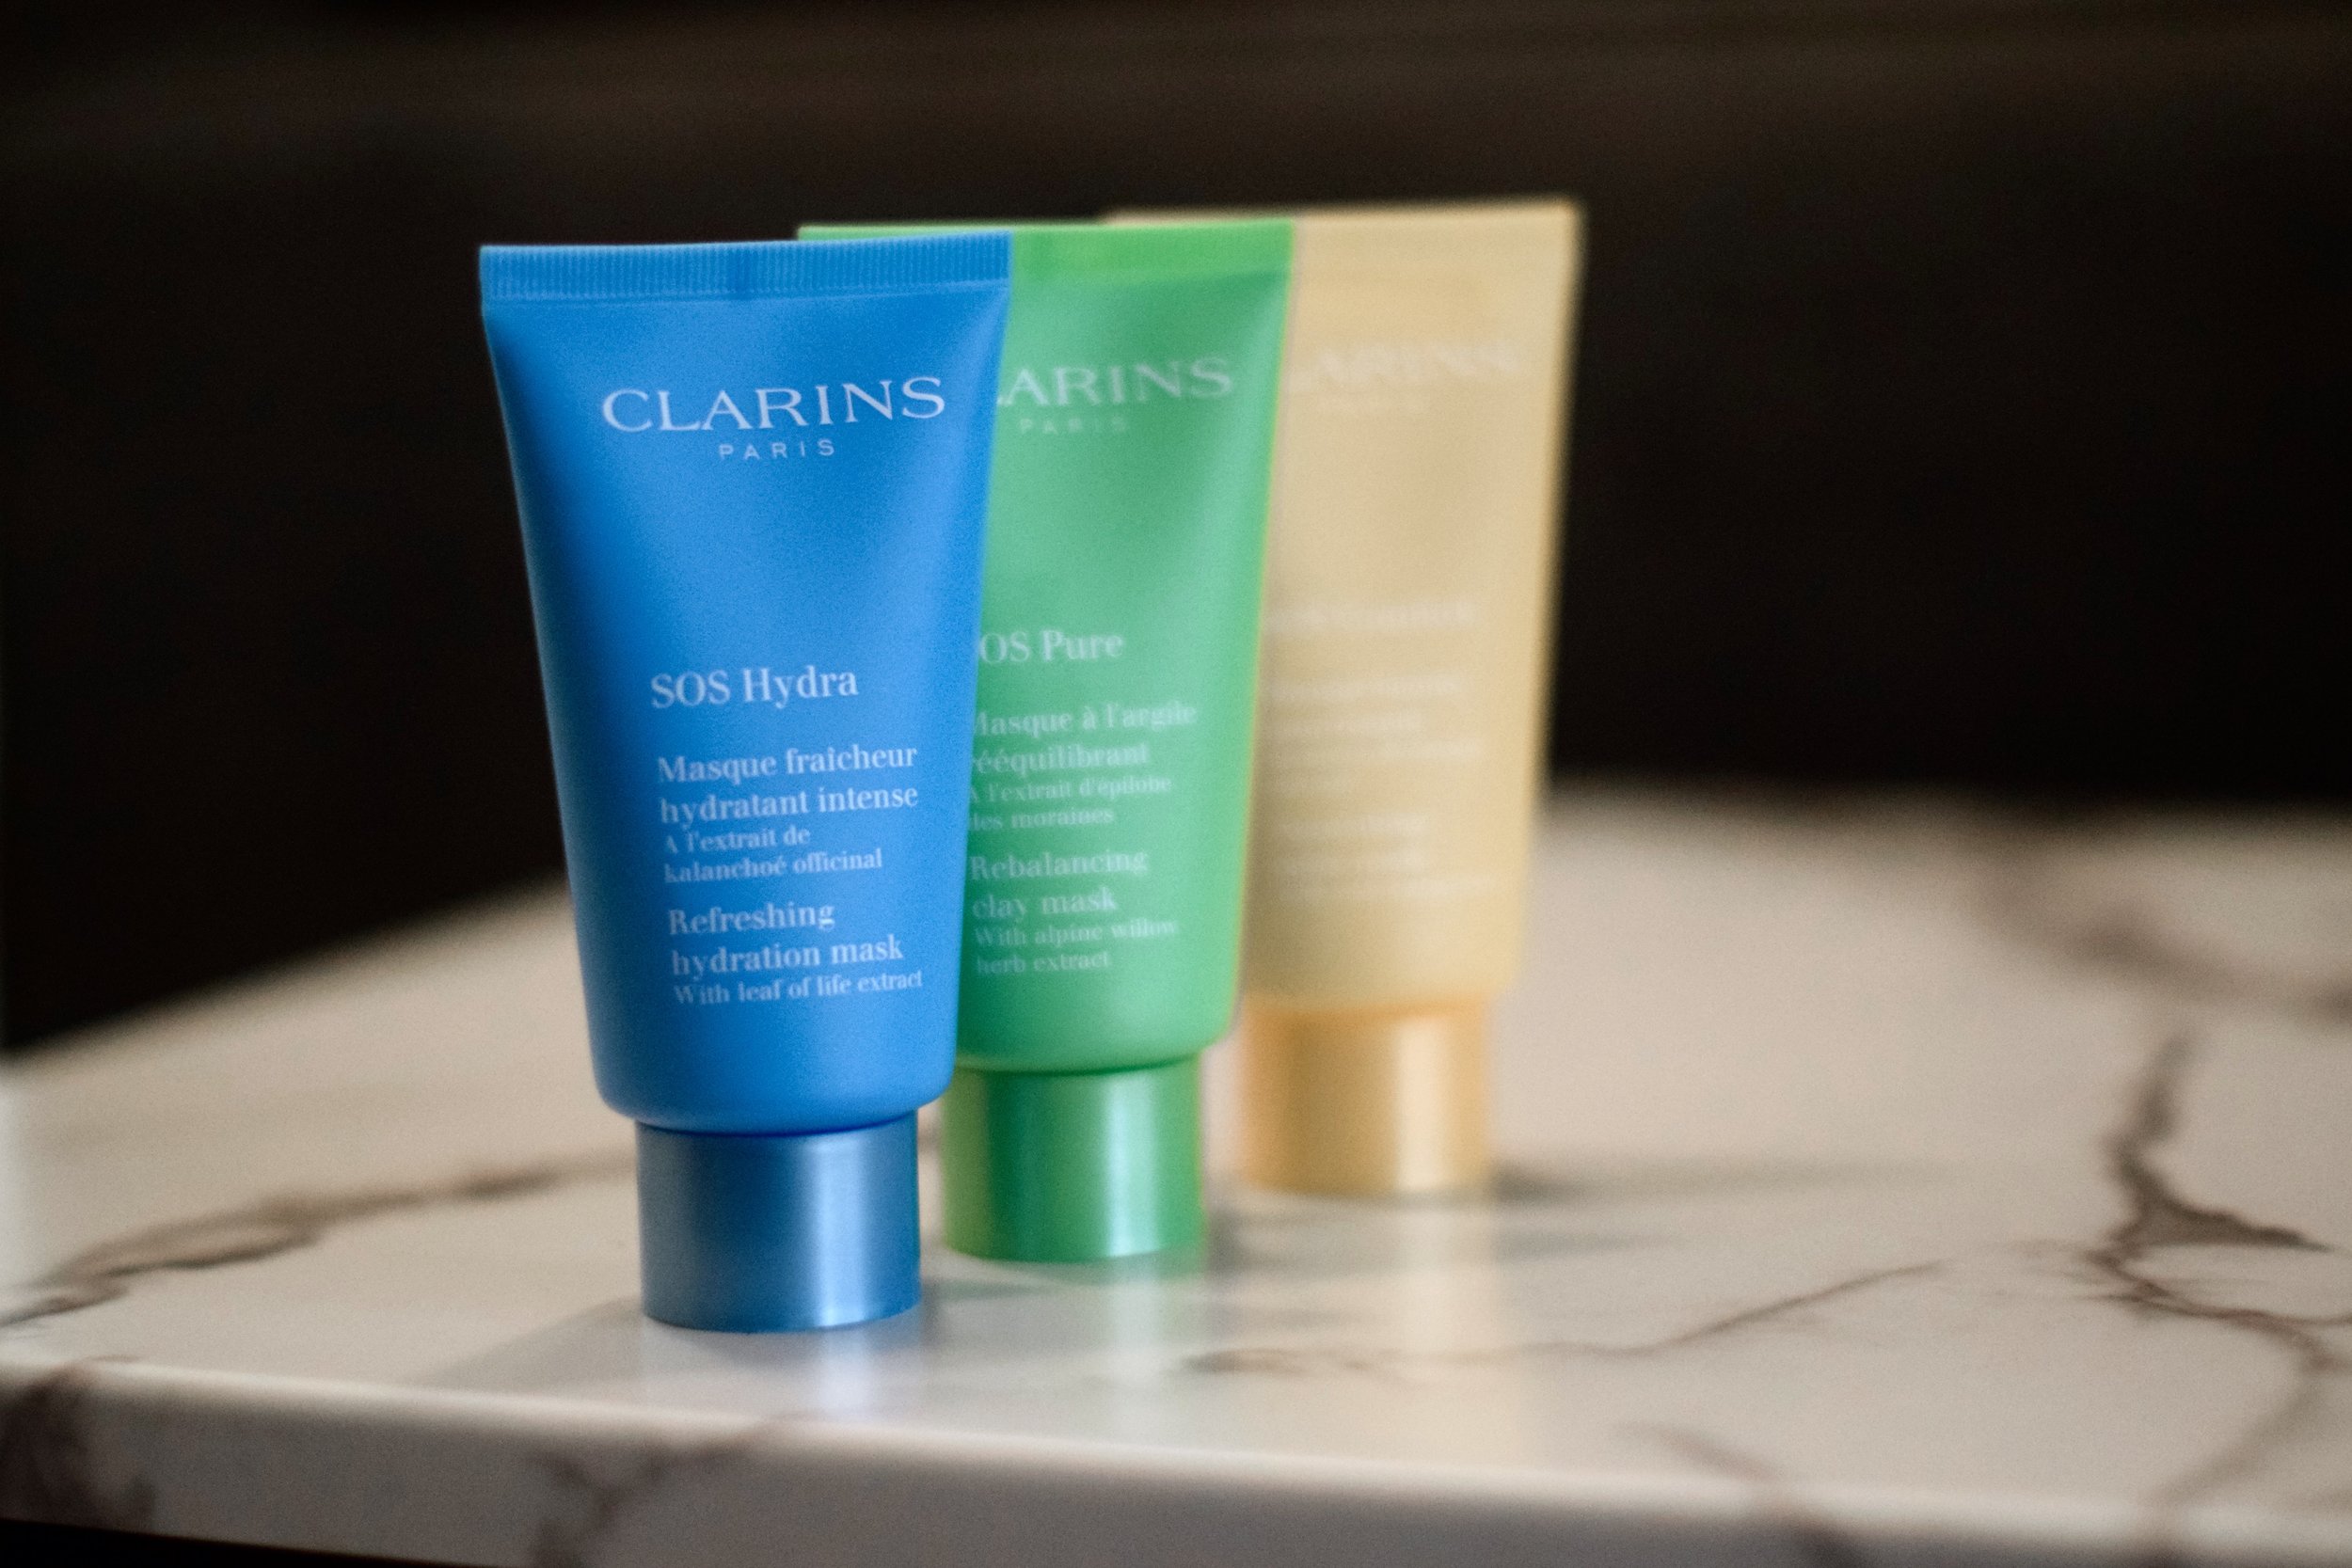 SOS Face Masks Clarins Esther Santer Fashion Blog NYC Street Style Blogger Outfit OOTD Trendy Beauty Product Review Colorful Blue Green Yellow Bottle Moisturize Masque Rebalancing Shop Skincare Skin Routine Comfort Girl Women New York City Hydrate.jpg